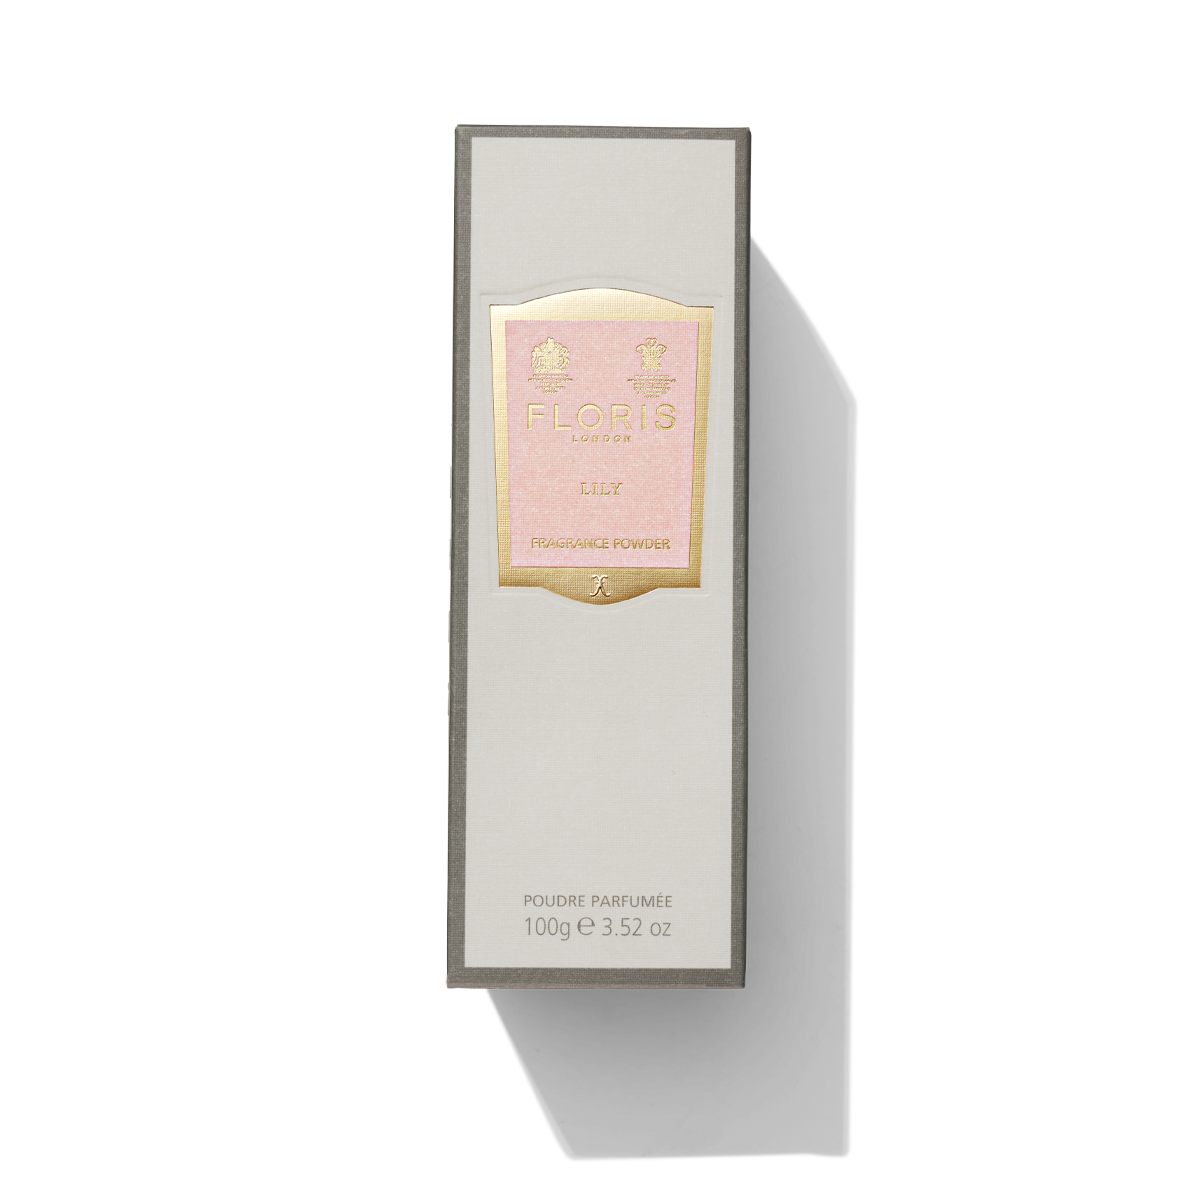 Grey box with light pink and gold label containing Lily Fragrance Powder